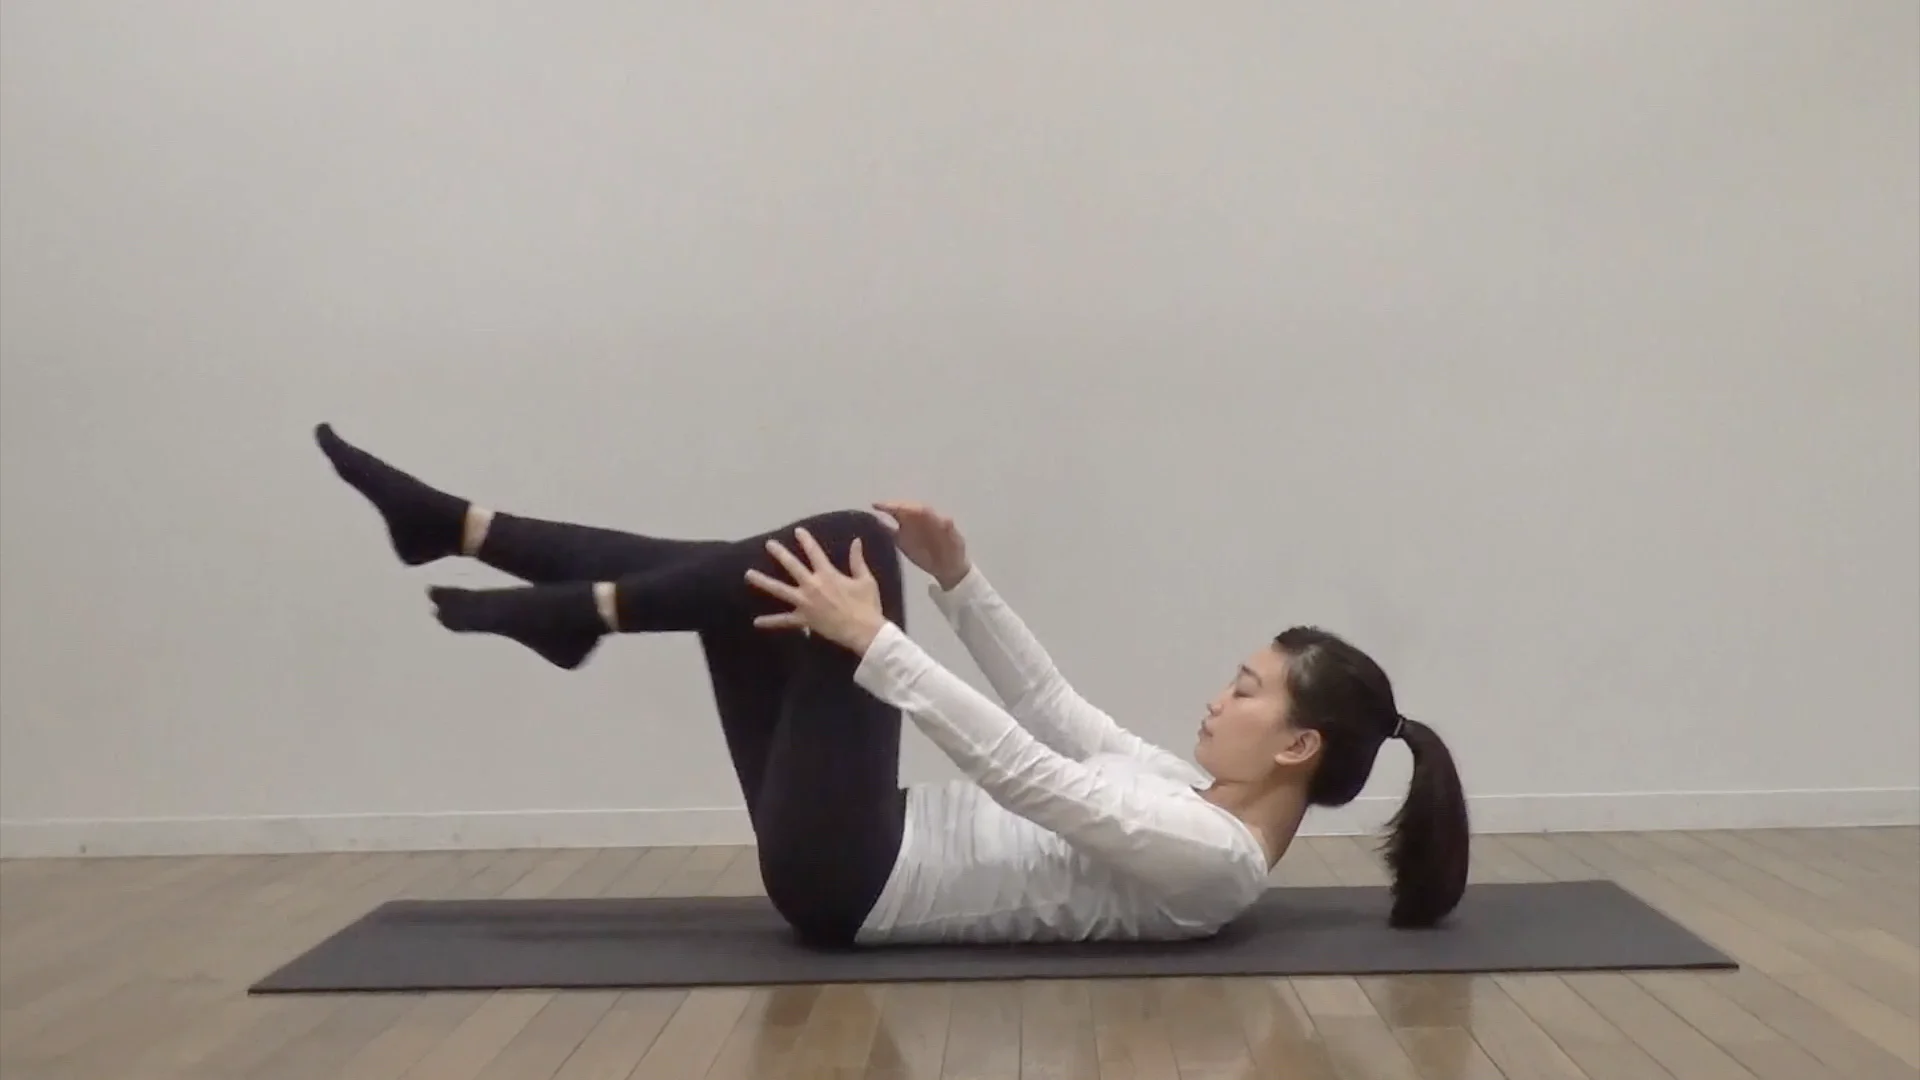 Seated Single Leg Stretch To Cross Reach by Camila R. - Exercise How-to -  Skimble